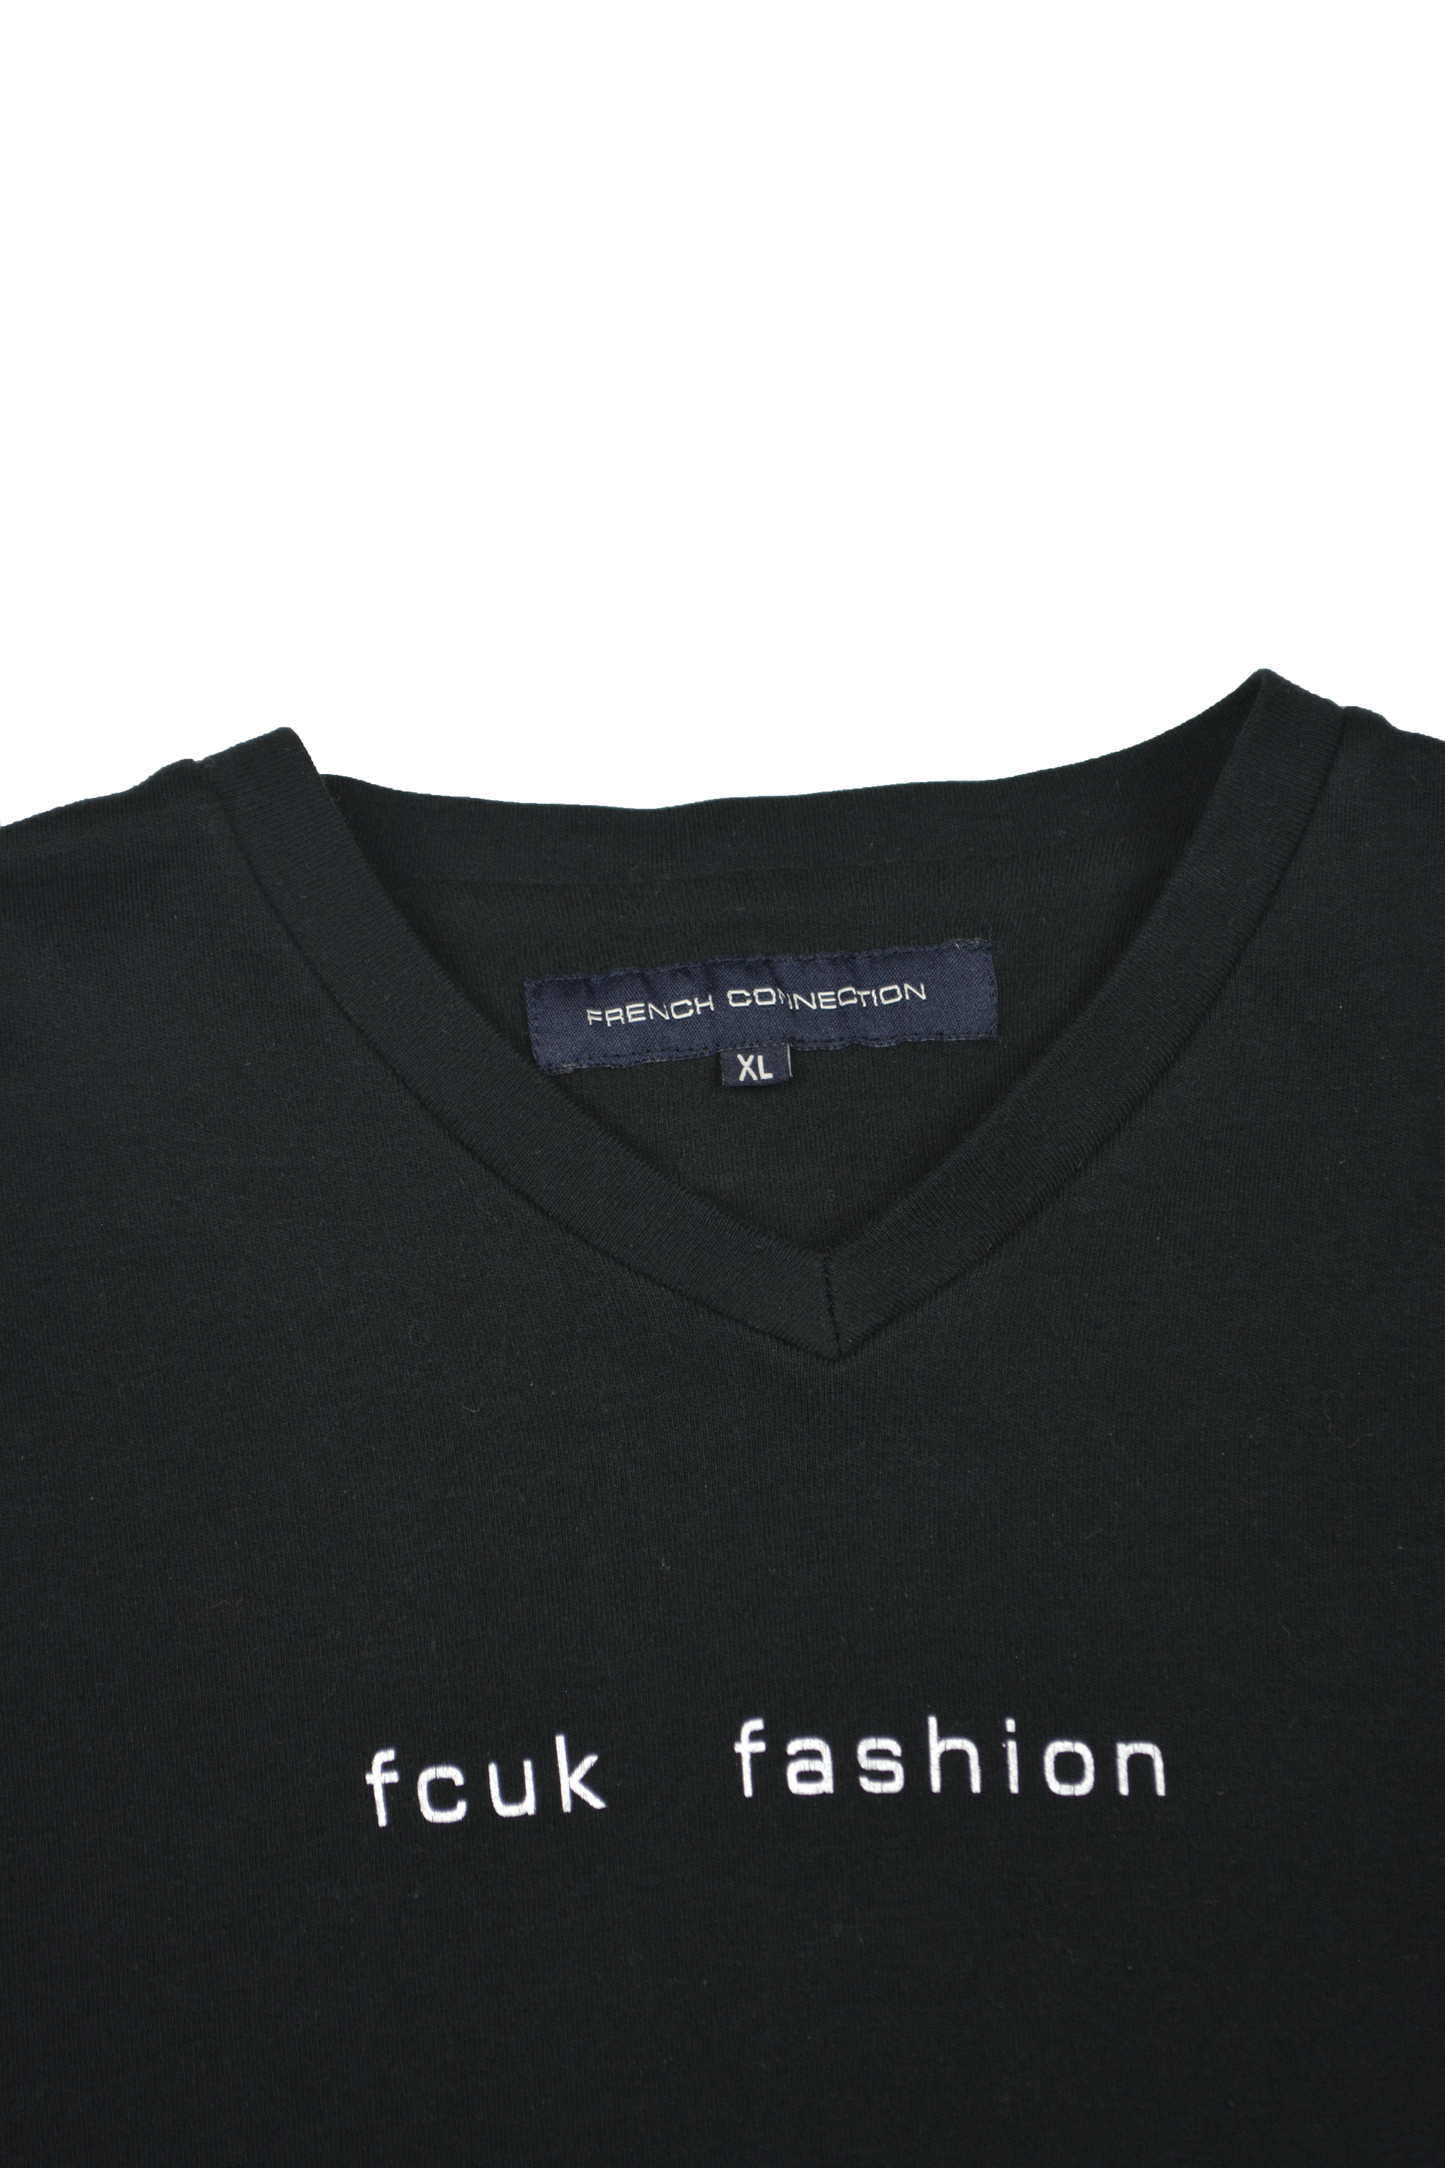 Vintage French Connection T-Shirt // XL